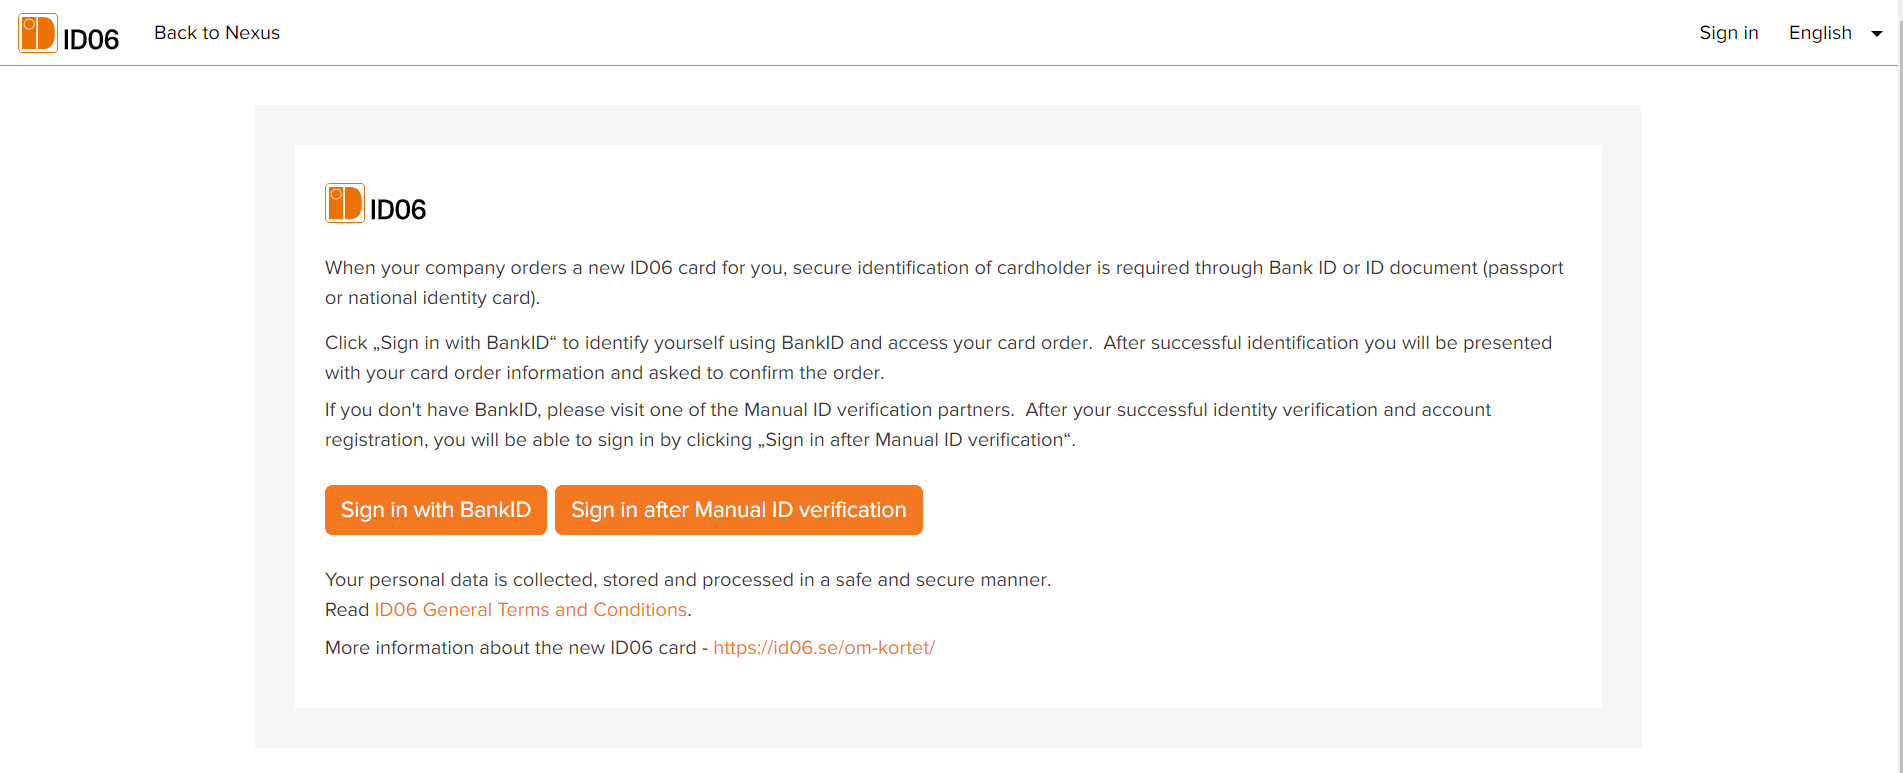 Sign in after manual ID verification